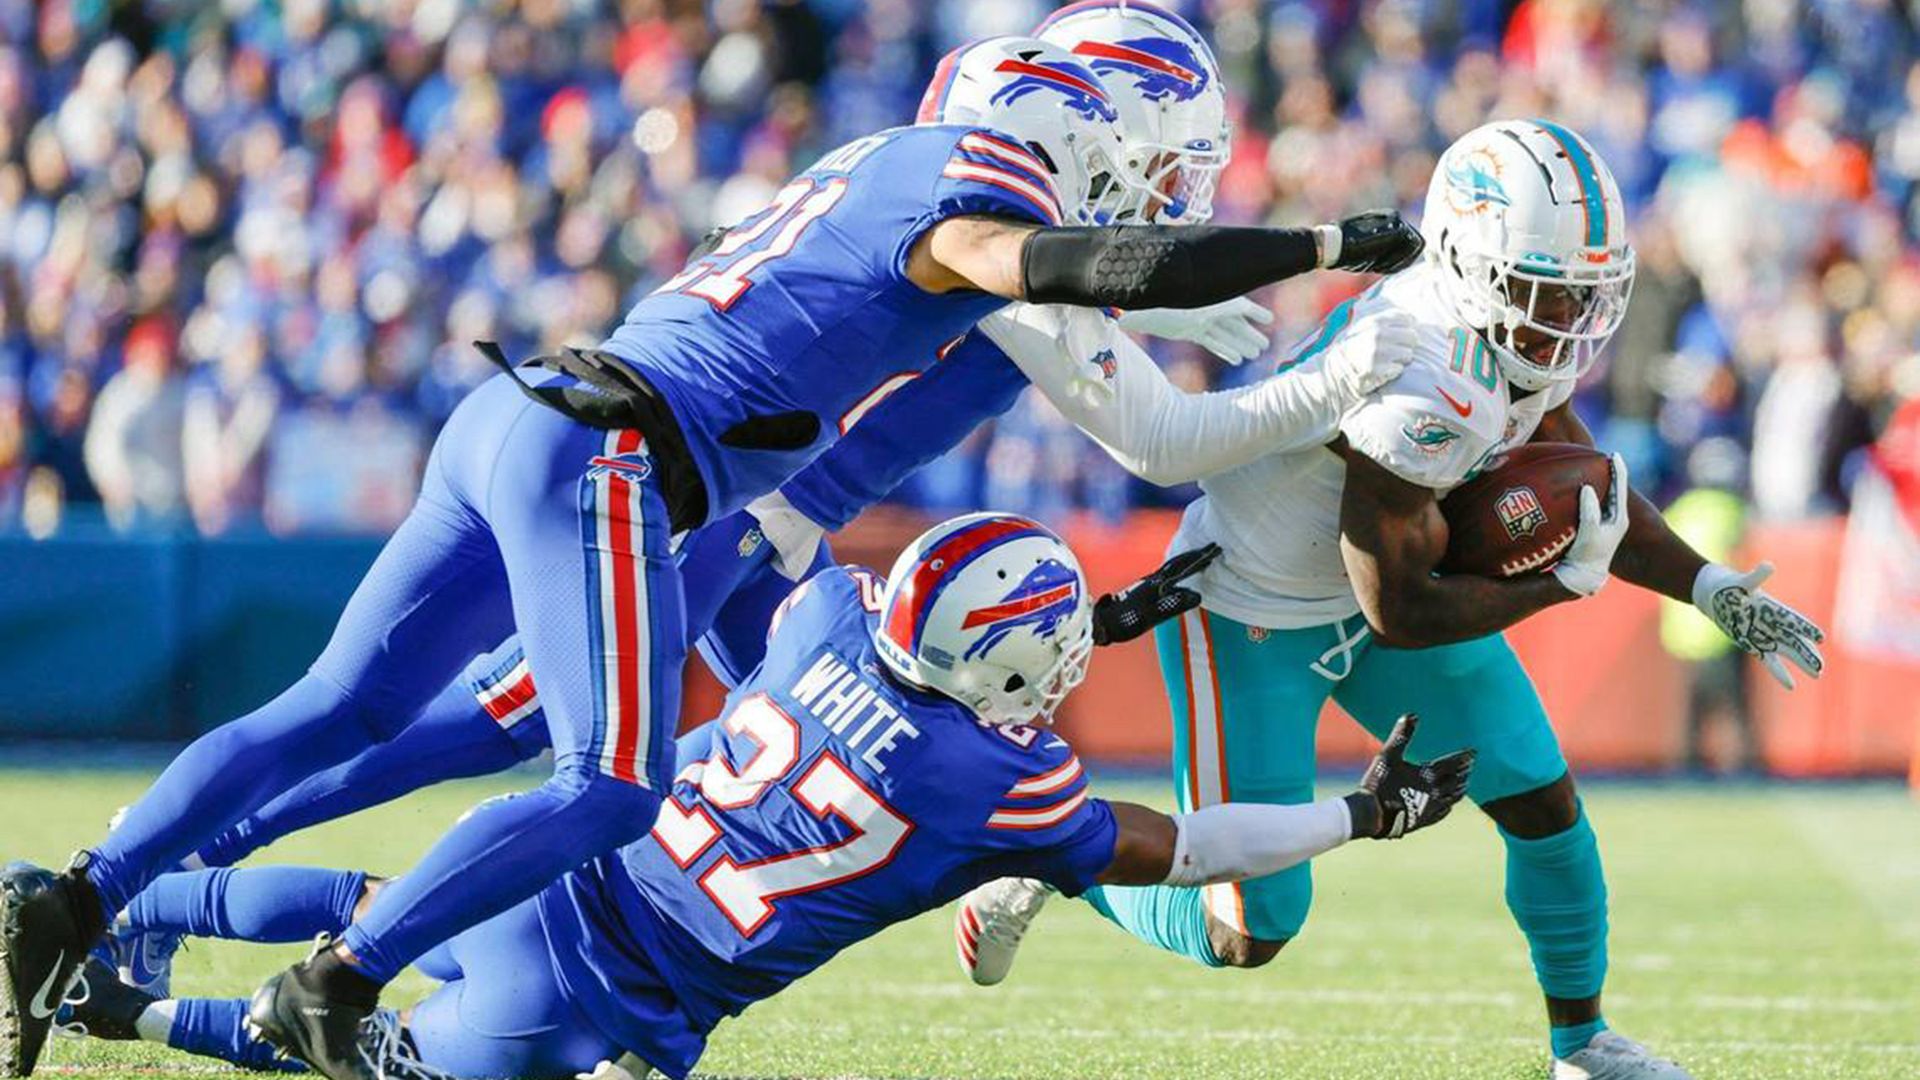 Miami Dolphins wide receiver Tyreek Hill runs after a catch versus the Buffalo Bills.